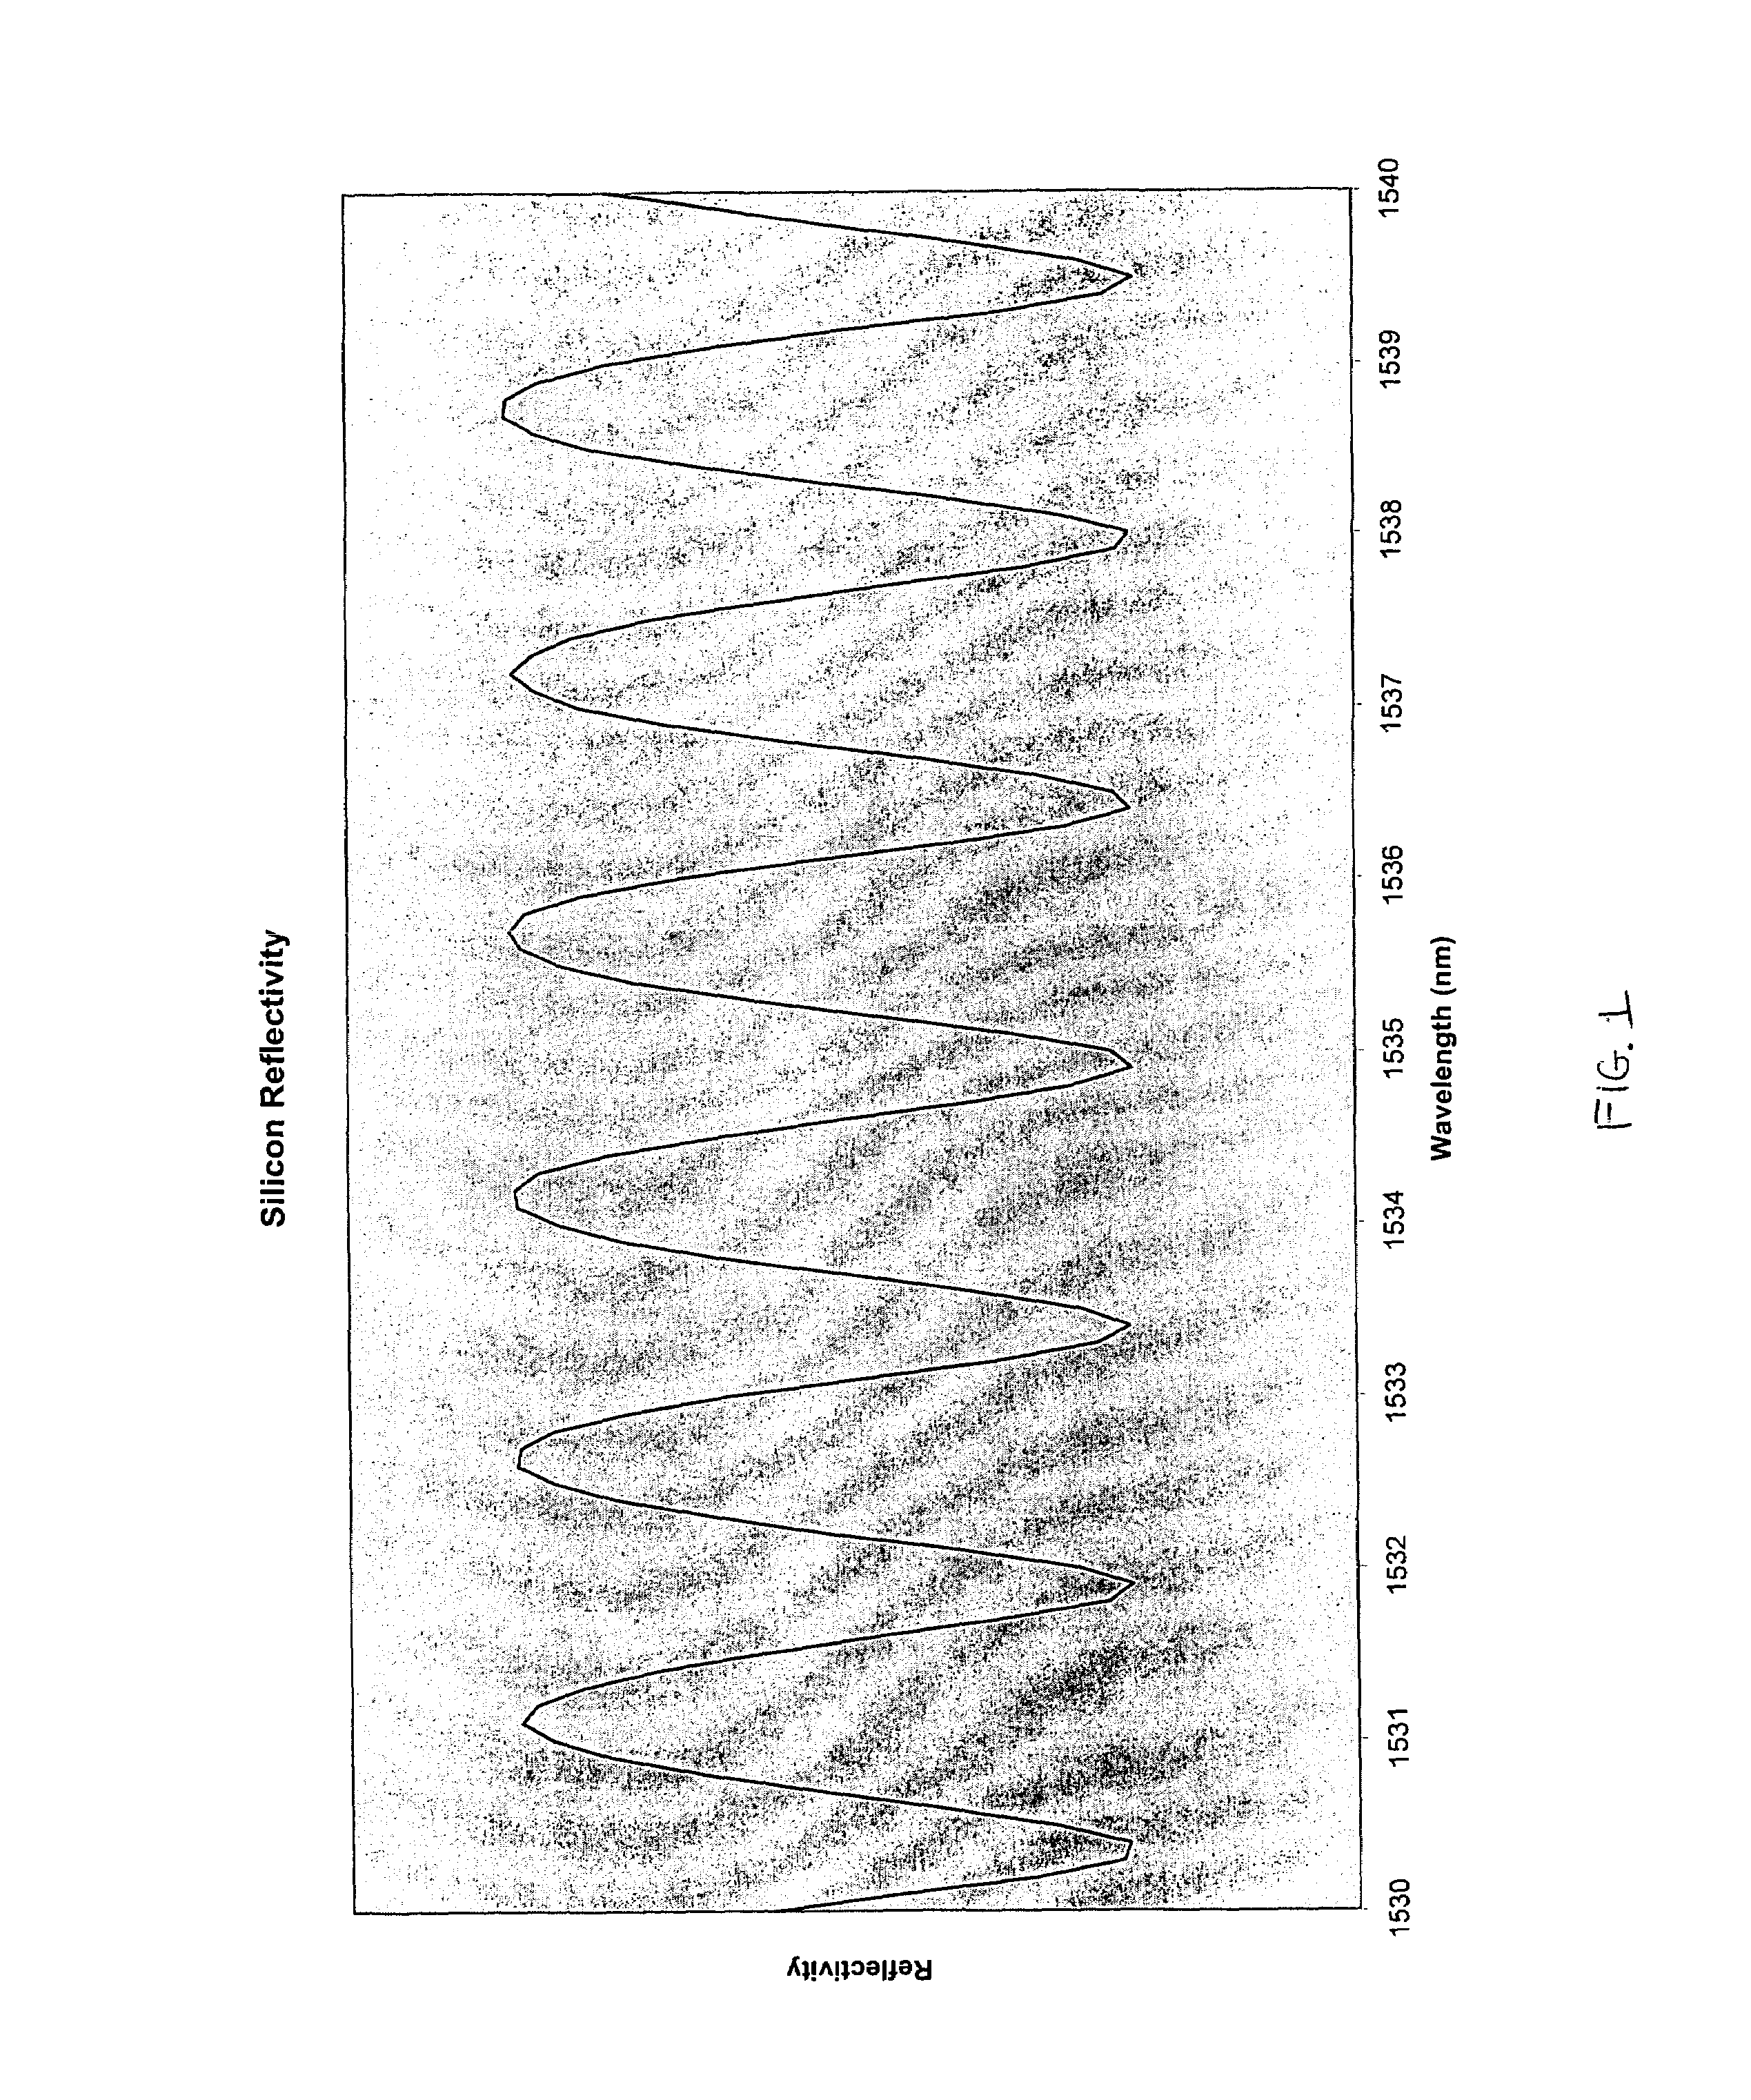 Method and apparatus for measuring thickness of a material